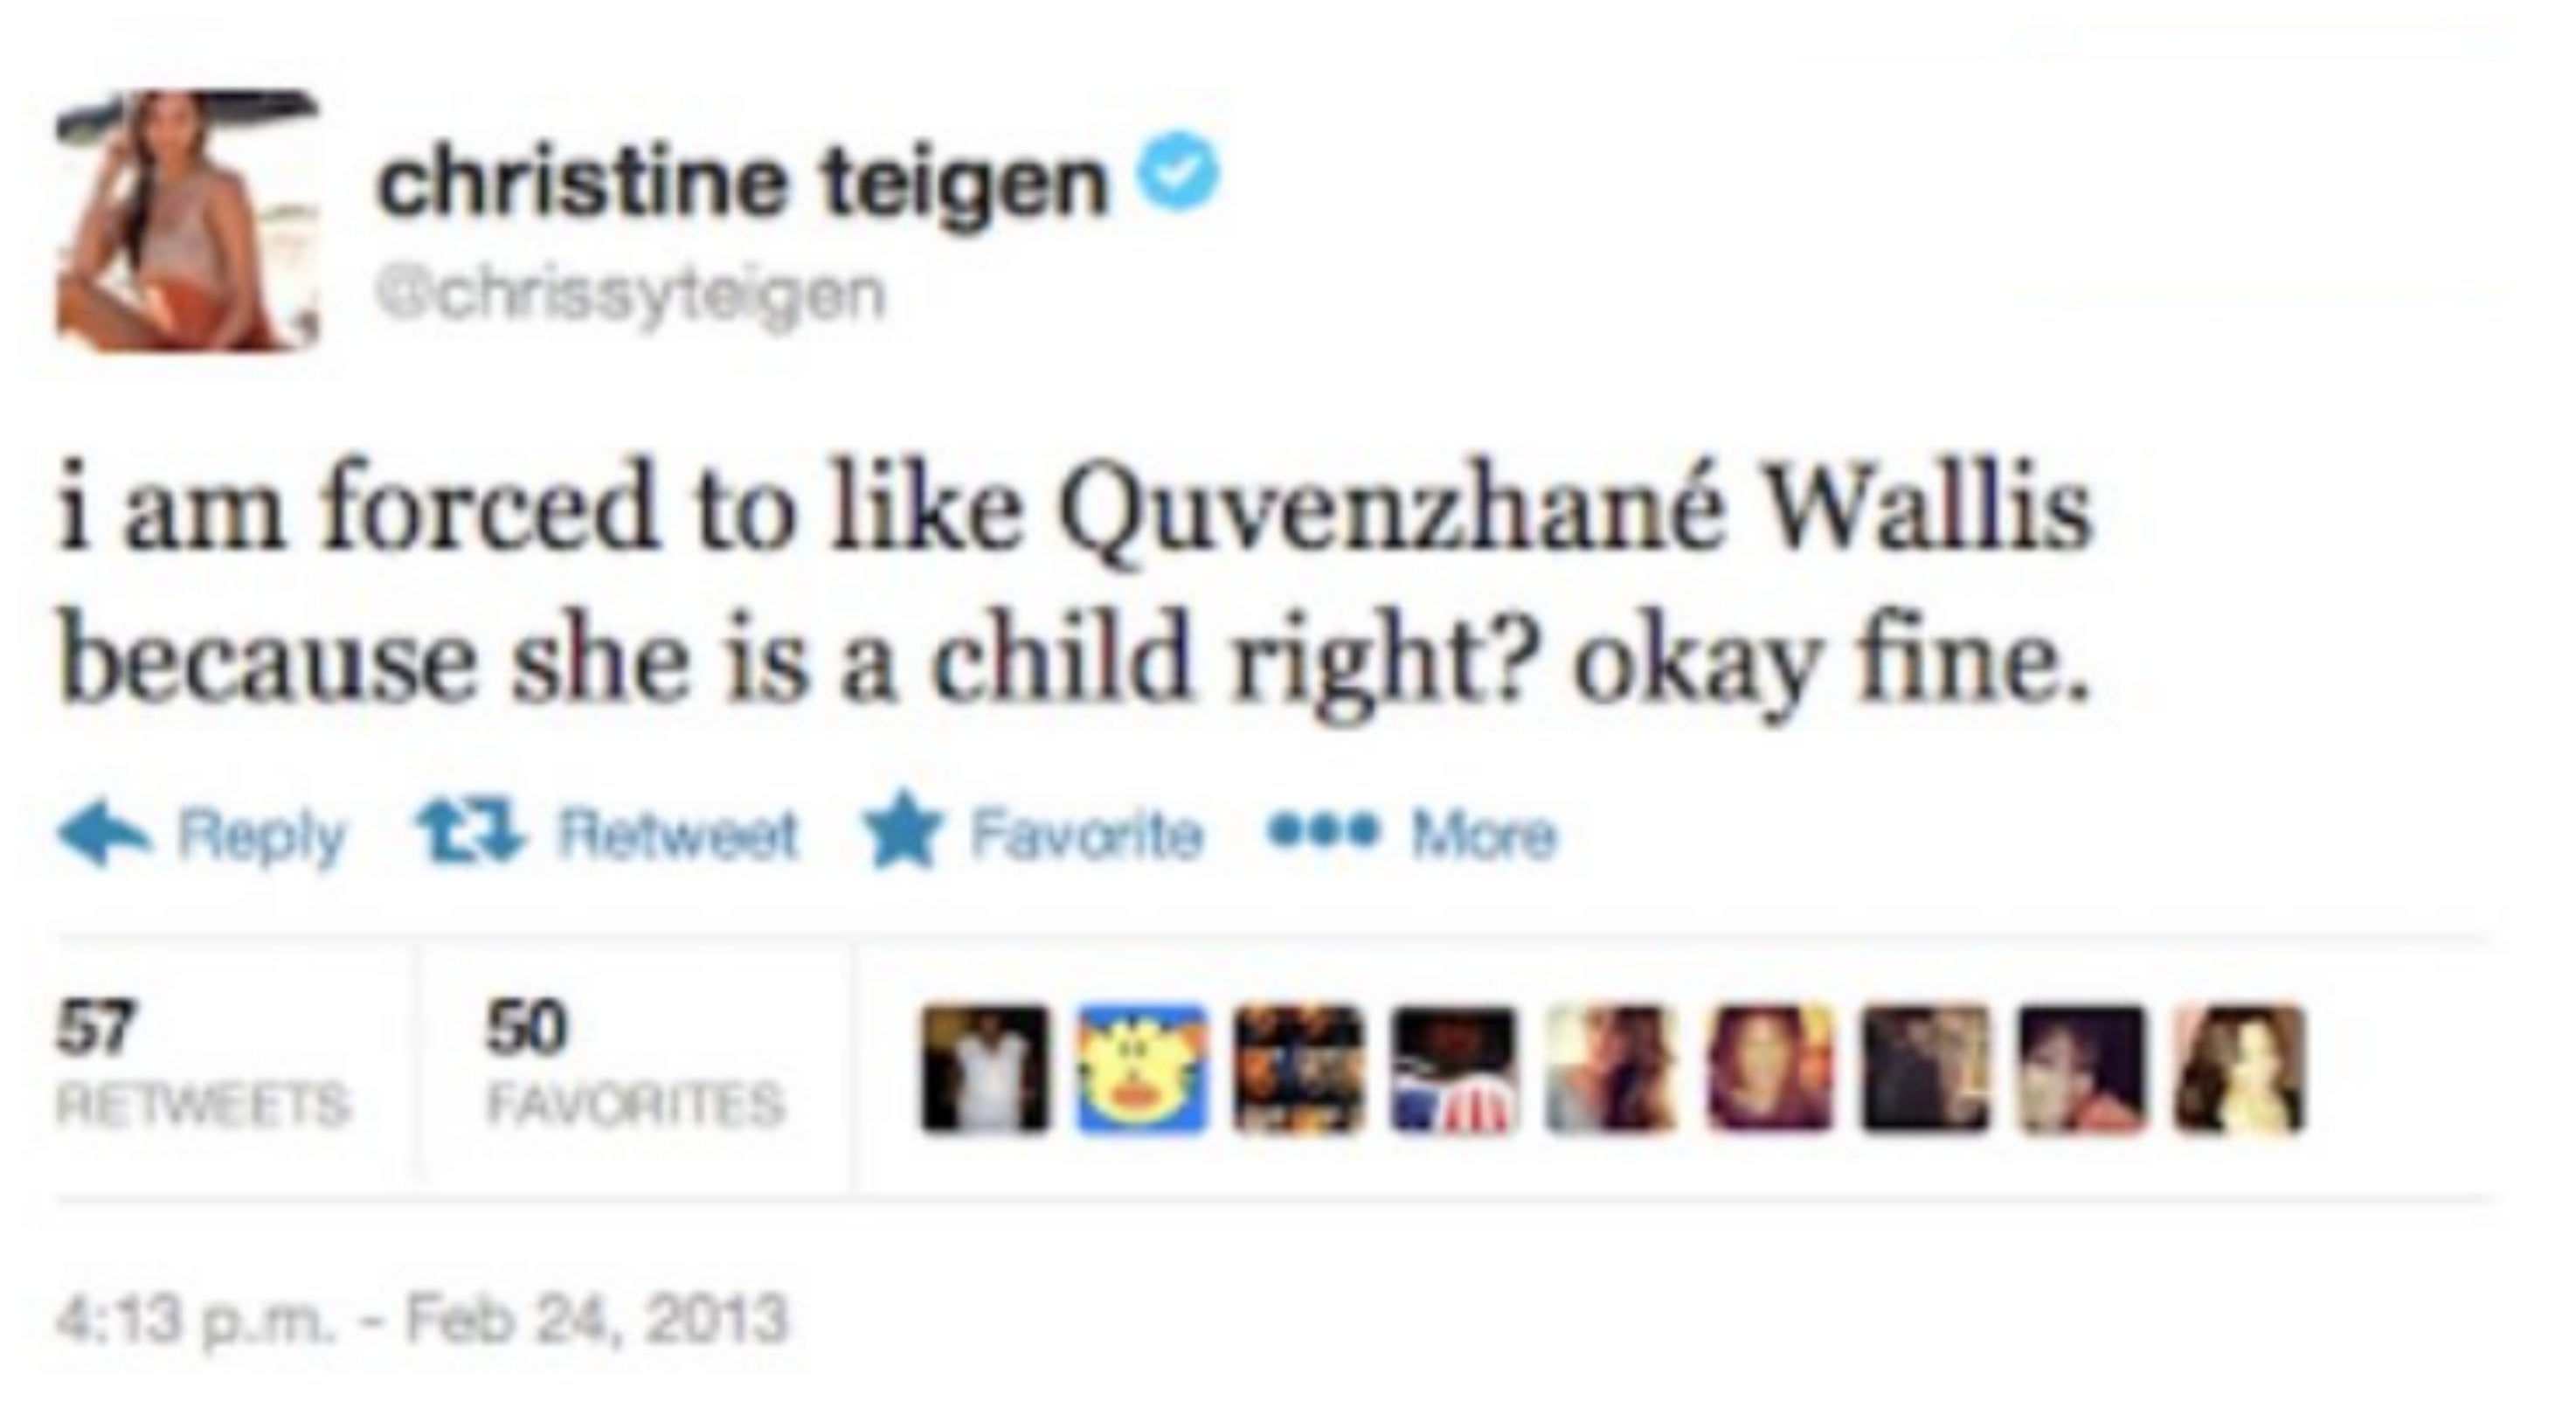 Tweet by Christine Teigen expressing forced liking for Quvenzhané Wallis due to her being a child, with mixed reactions from users